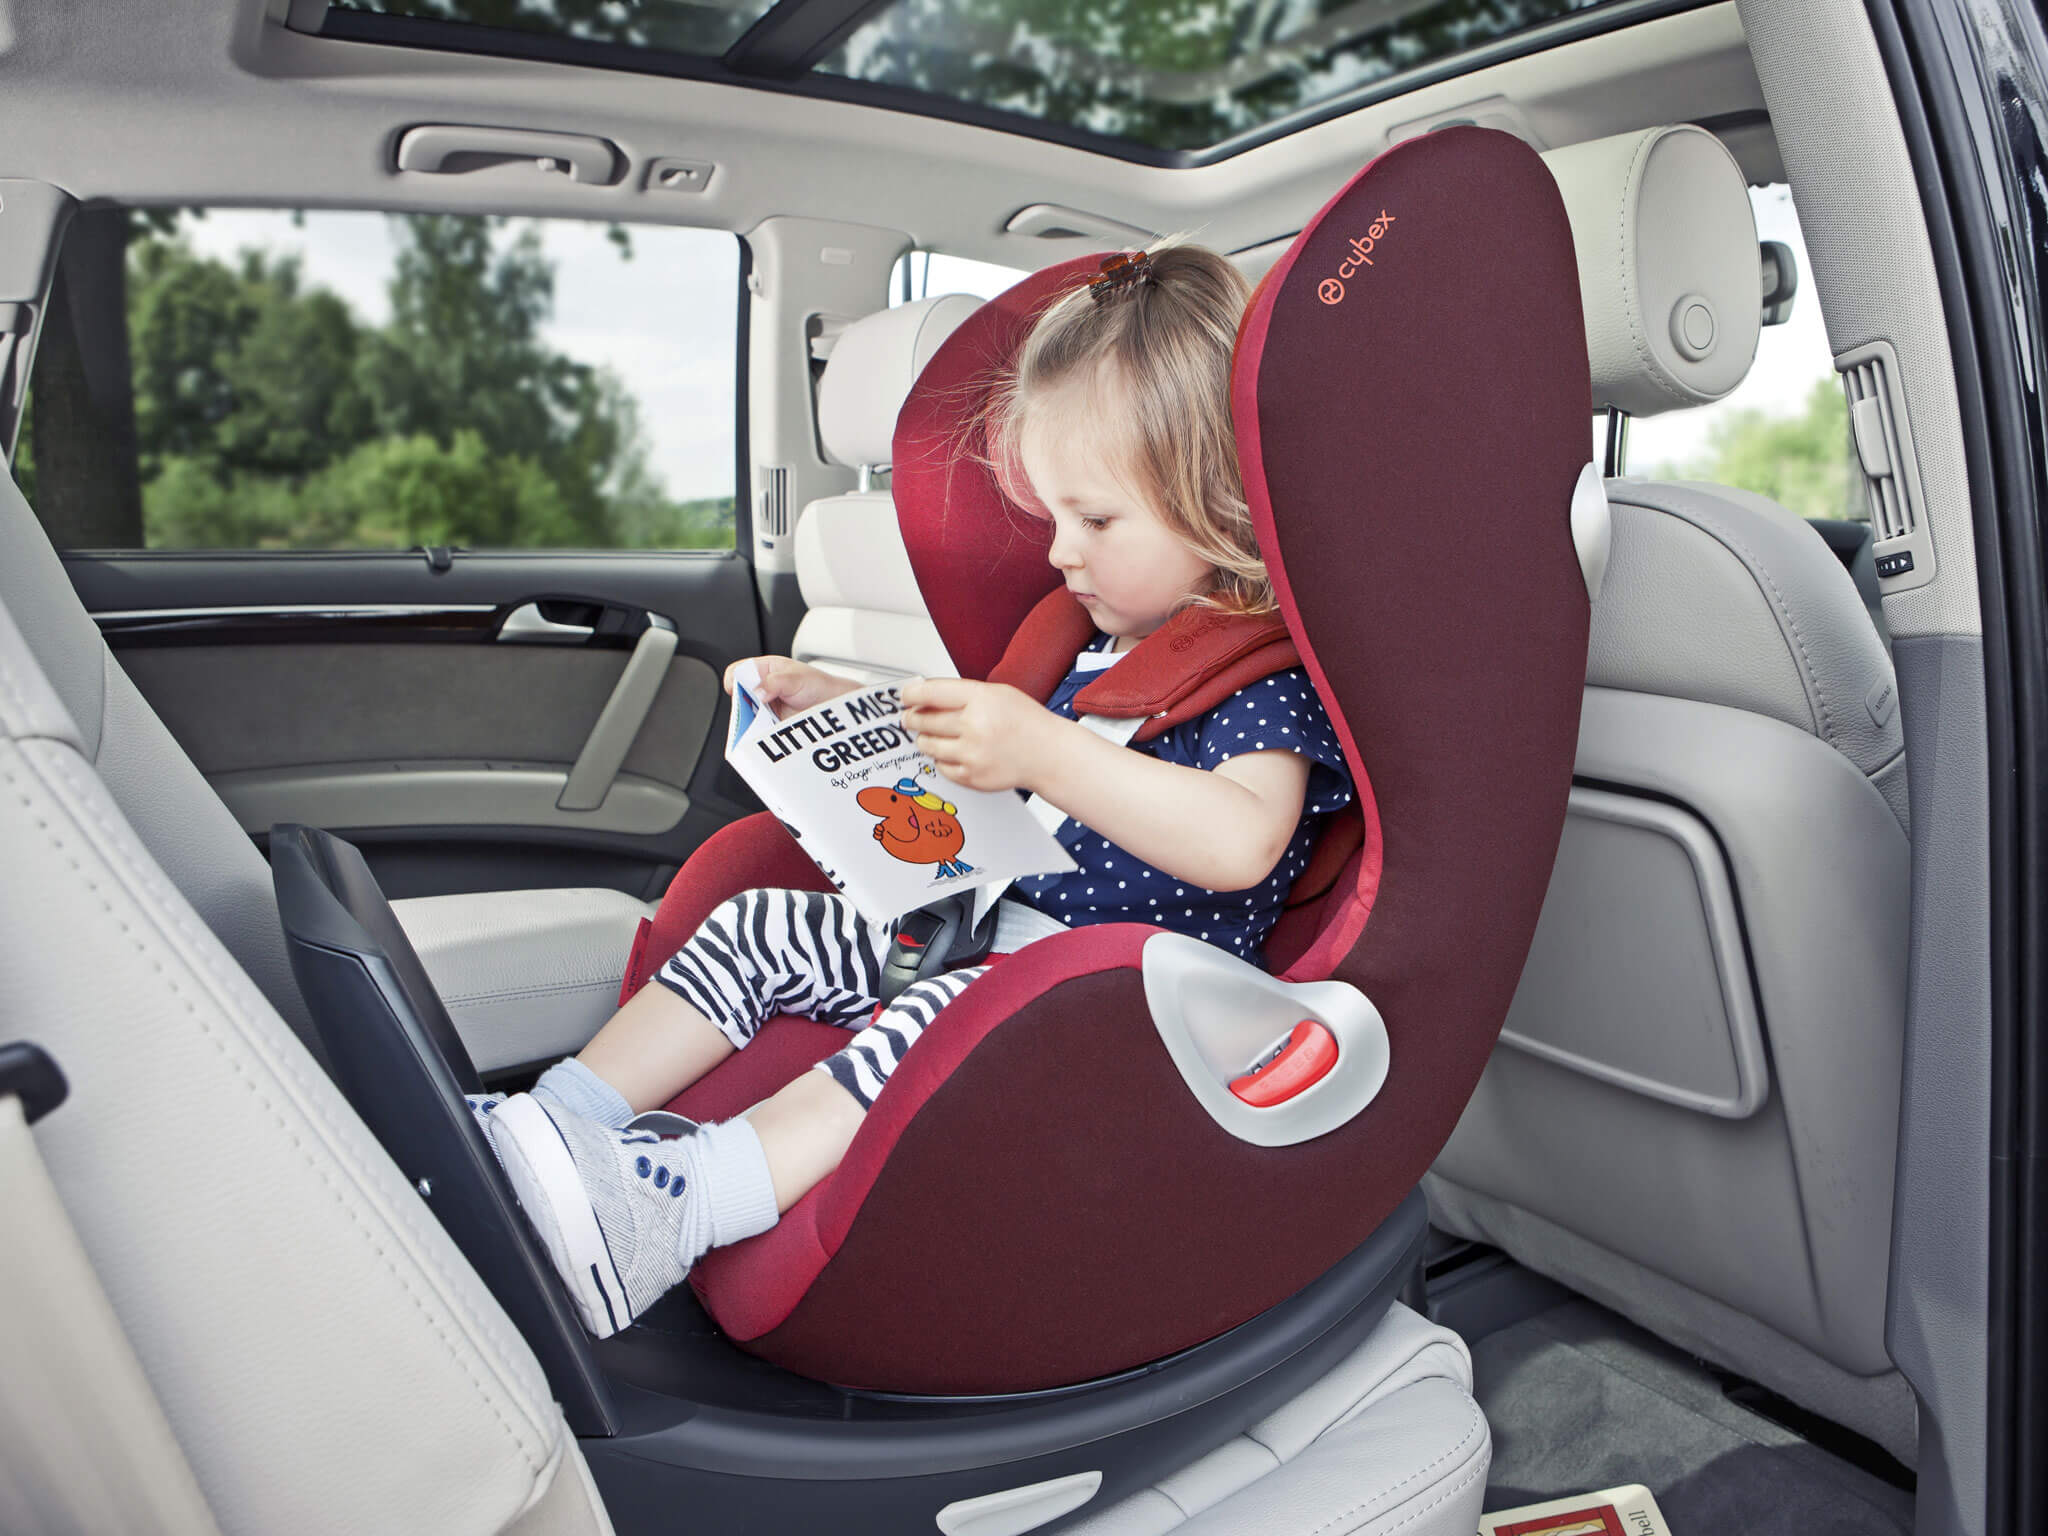 CHICCO Child Safety Seats Shop